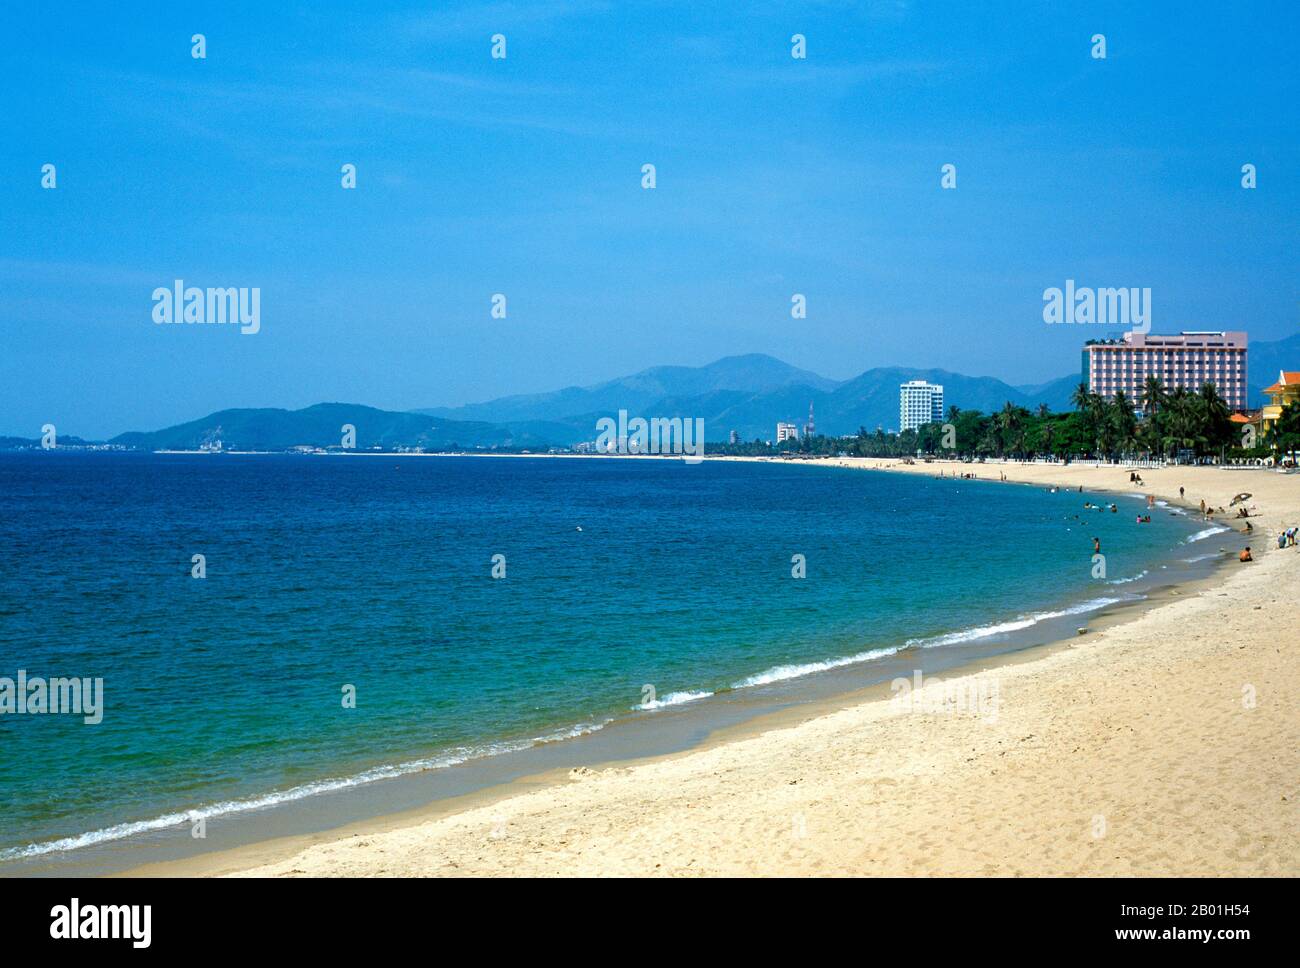 Vietnam: The Municipal Beach, Nha Trang, Khanh Hoa Province.  Nha Trang is a coastal city and capital of Khanh Hoa province, on the South Central Coast of Vietnam. Historically, the city was known as Kauthara under the Champa. The city is still home to the famous Po Nagar Tower built by the Champa. Being a coastal city, Nha Trang is a centre for marine science based at the Nha Trang Oceanography Institute. Stock Photo